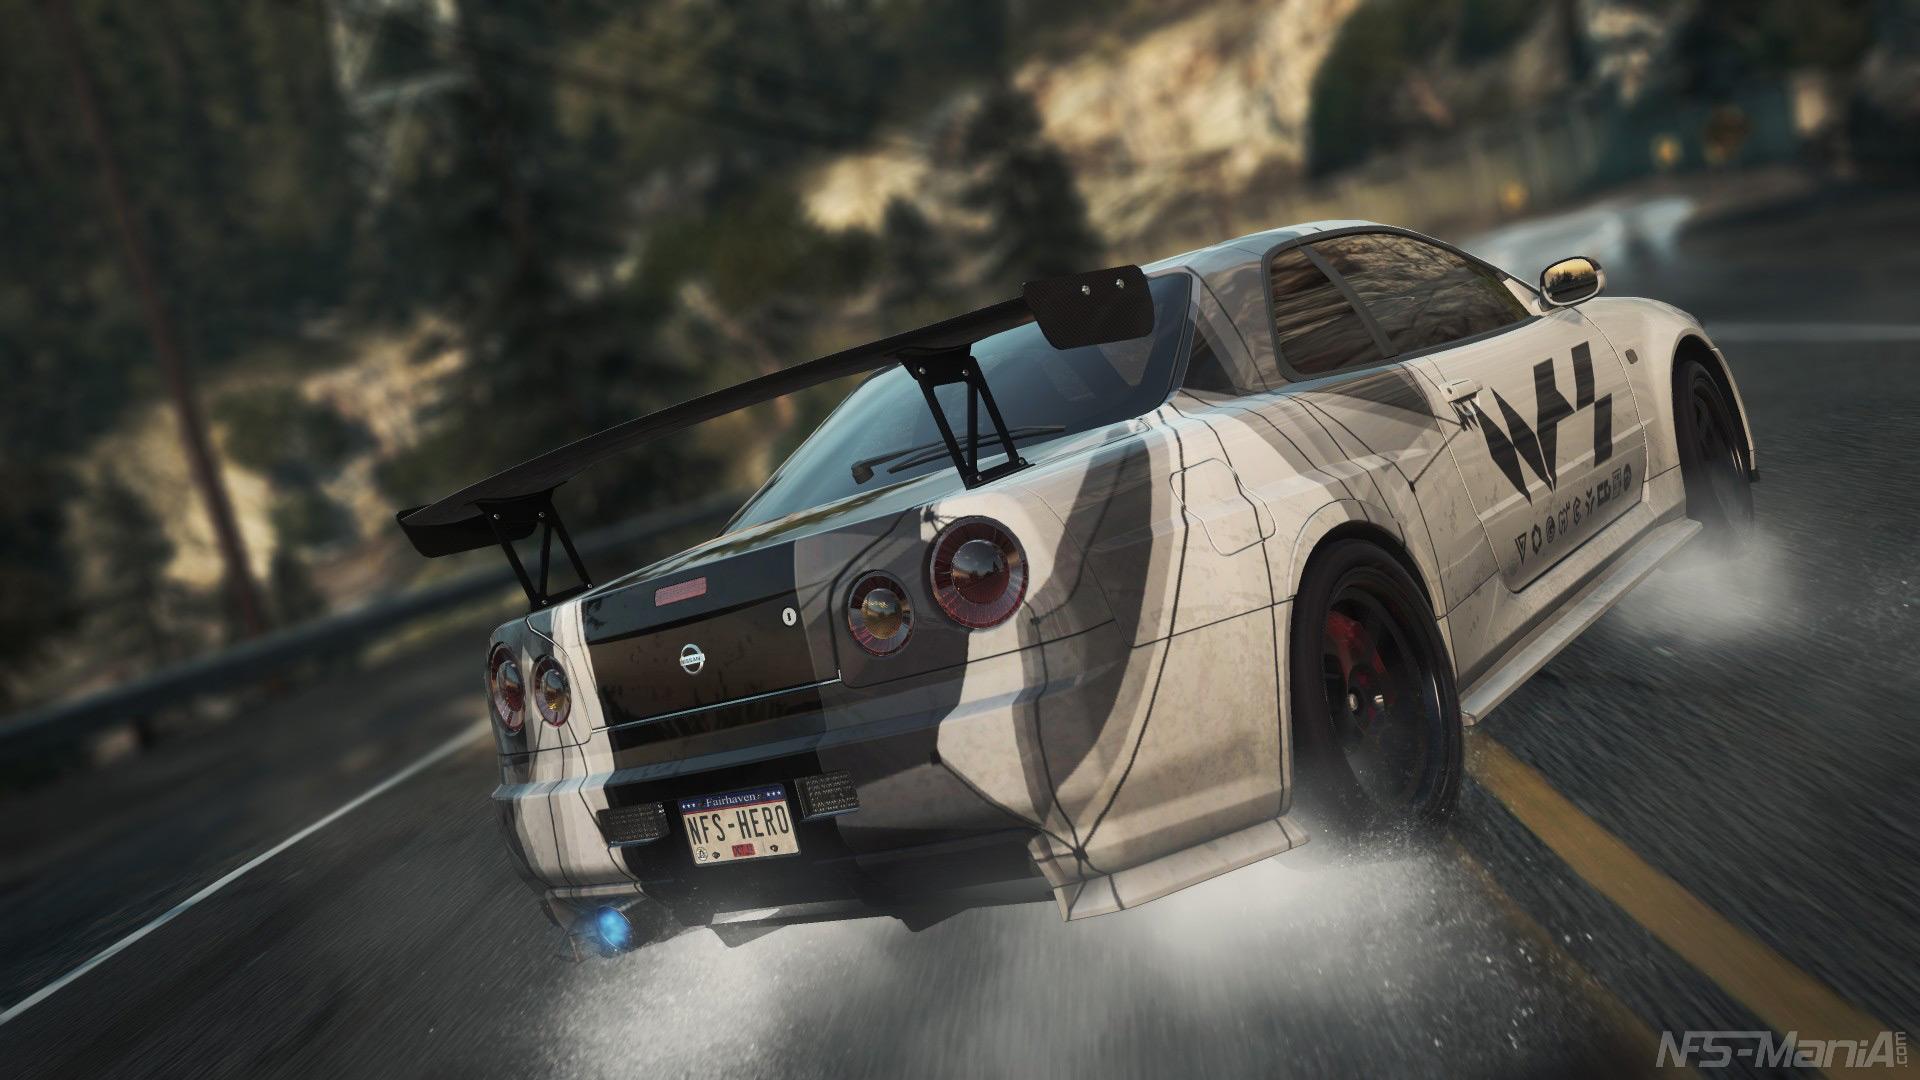 Nissan Skyline R34 - Nissan Skyline Need For Speed Most Wanted - HD Wallpaper 